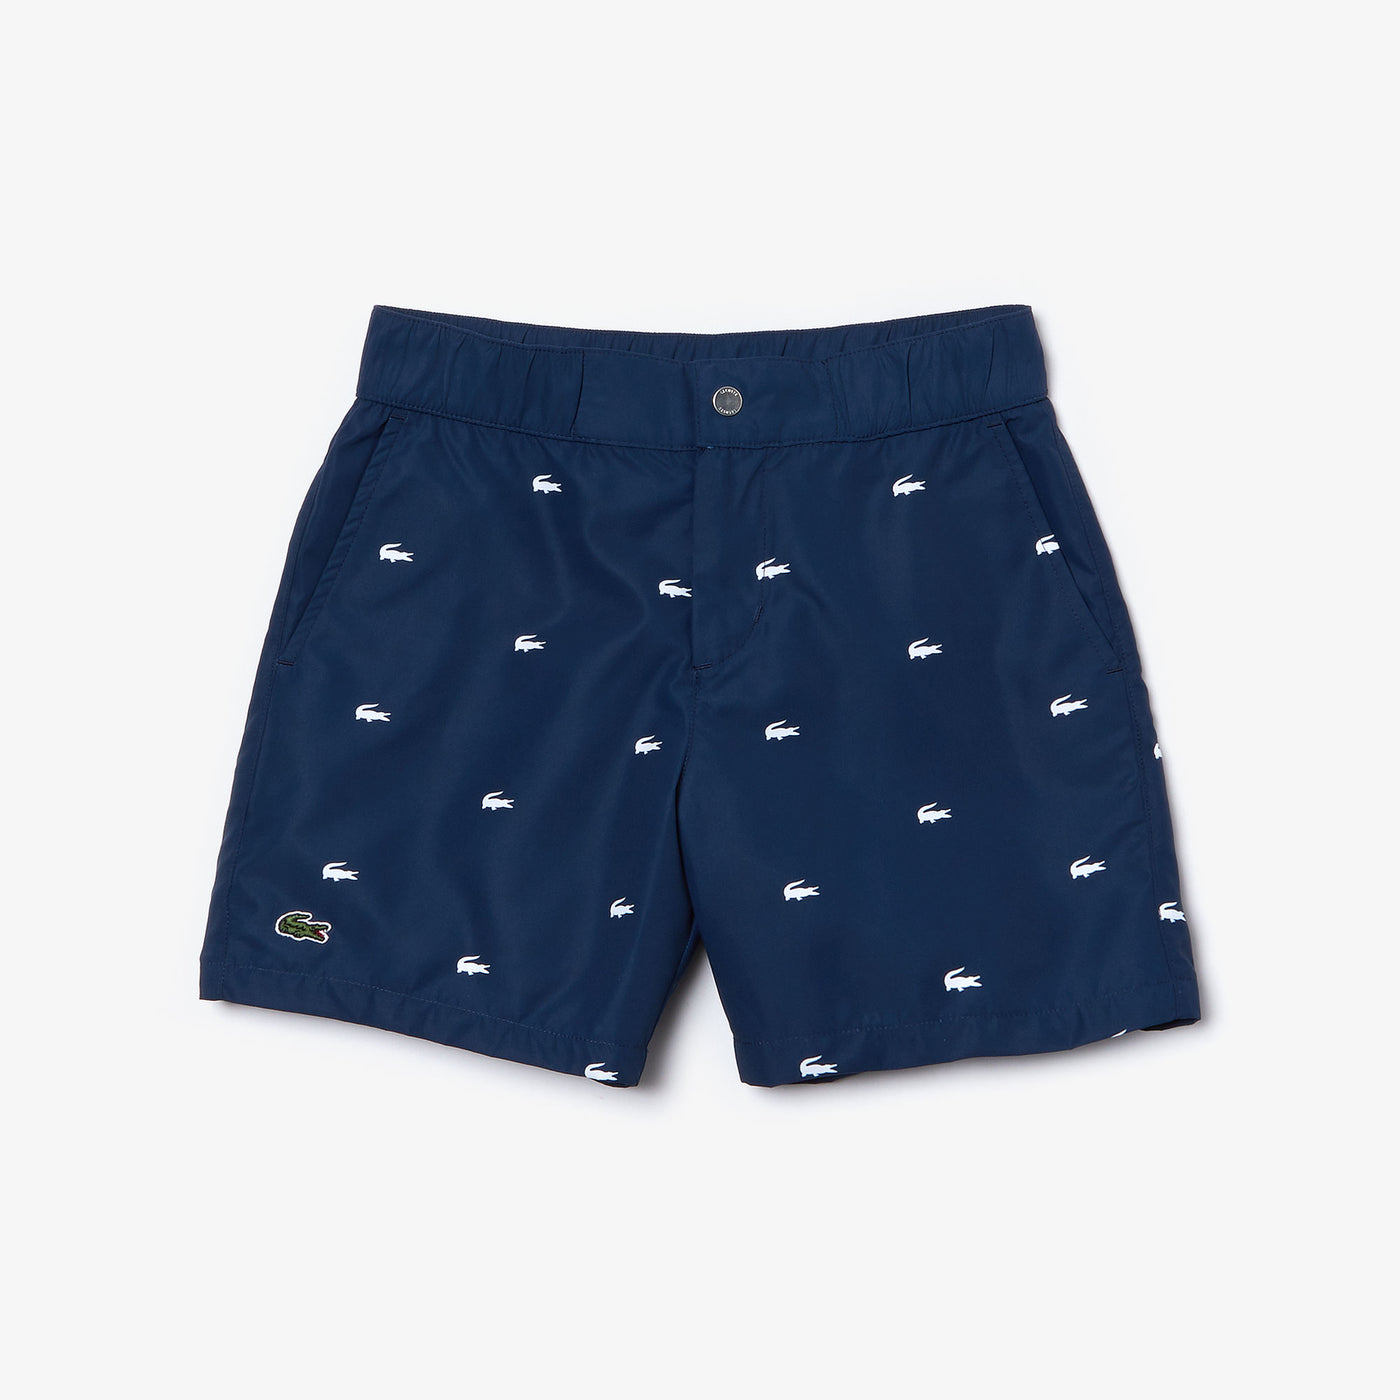 Shop The Latest Collection Of Outlet - Lacoste Boys’ Swim Trunks - Mj6962 In Lebanon